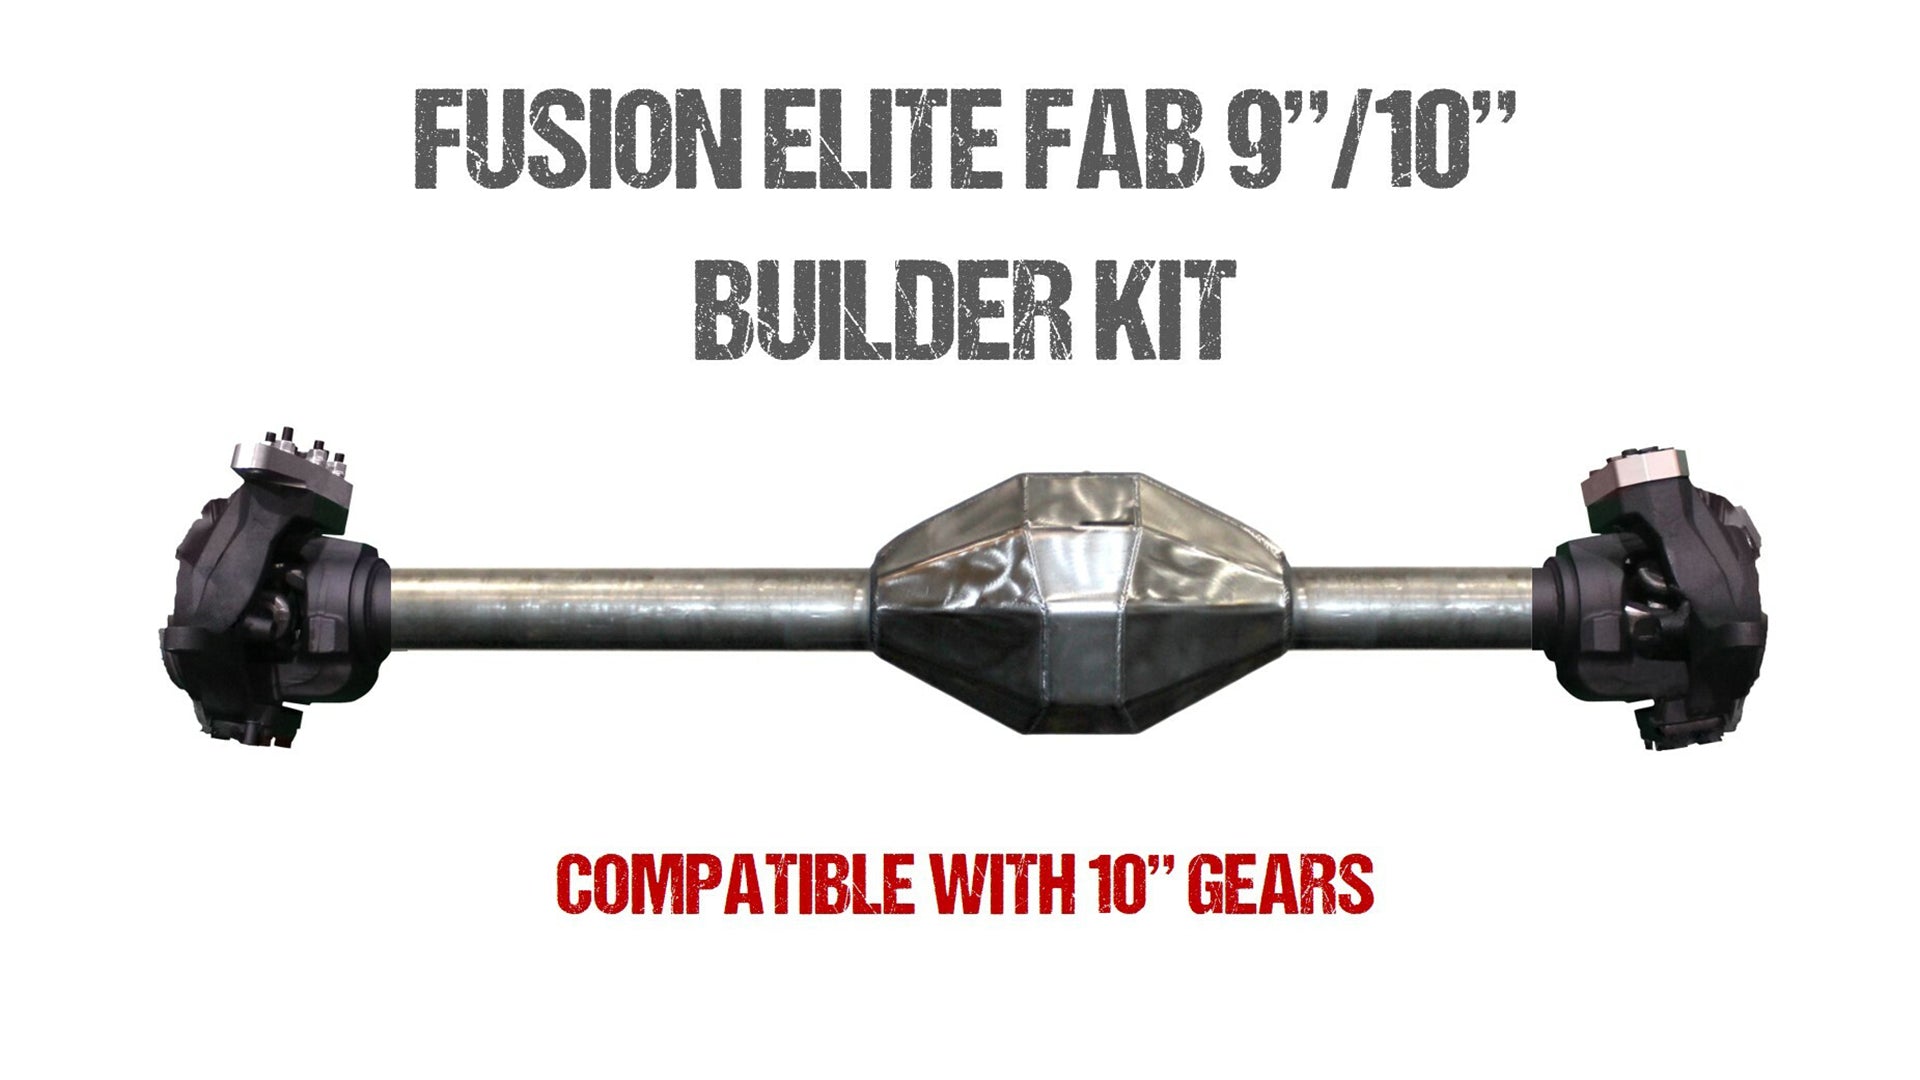 Fusion Elite Series Fabricated 9/10 Front Builder Kit